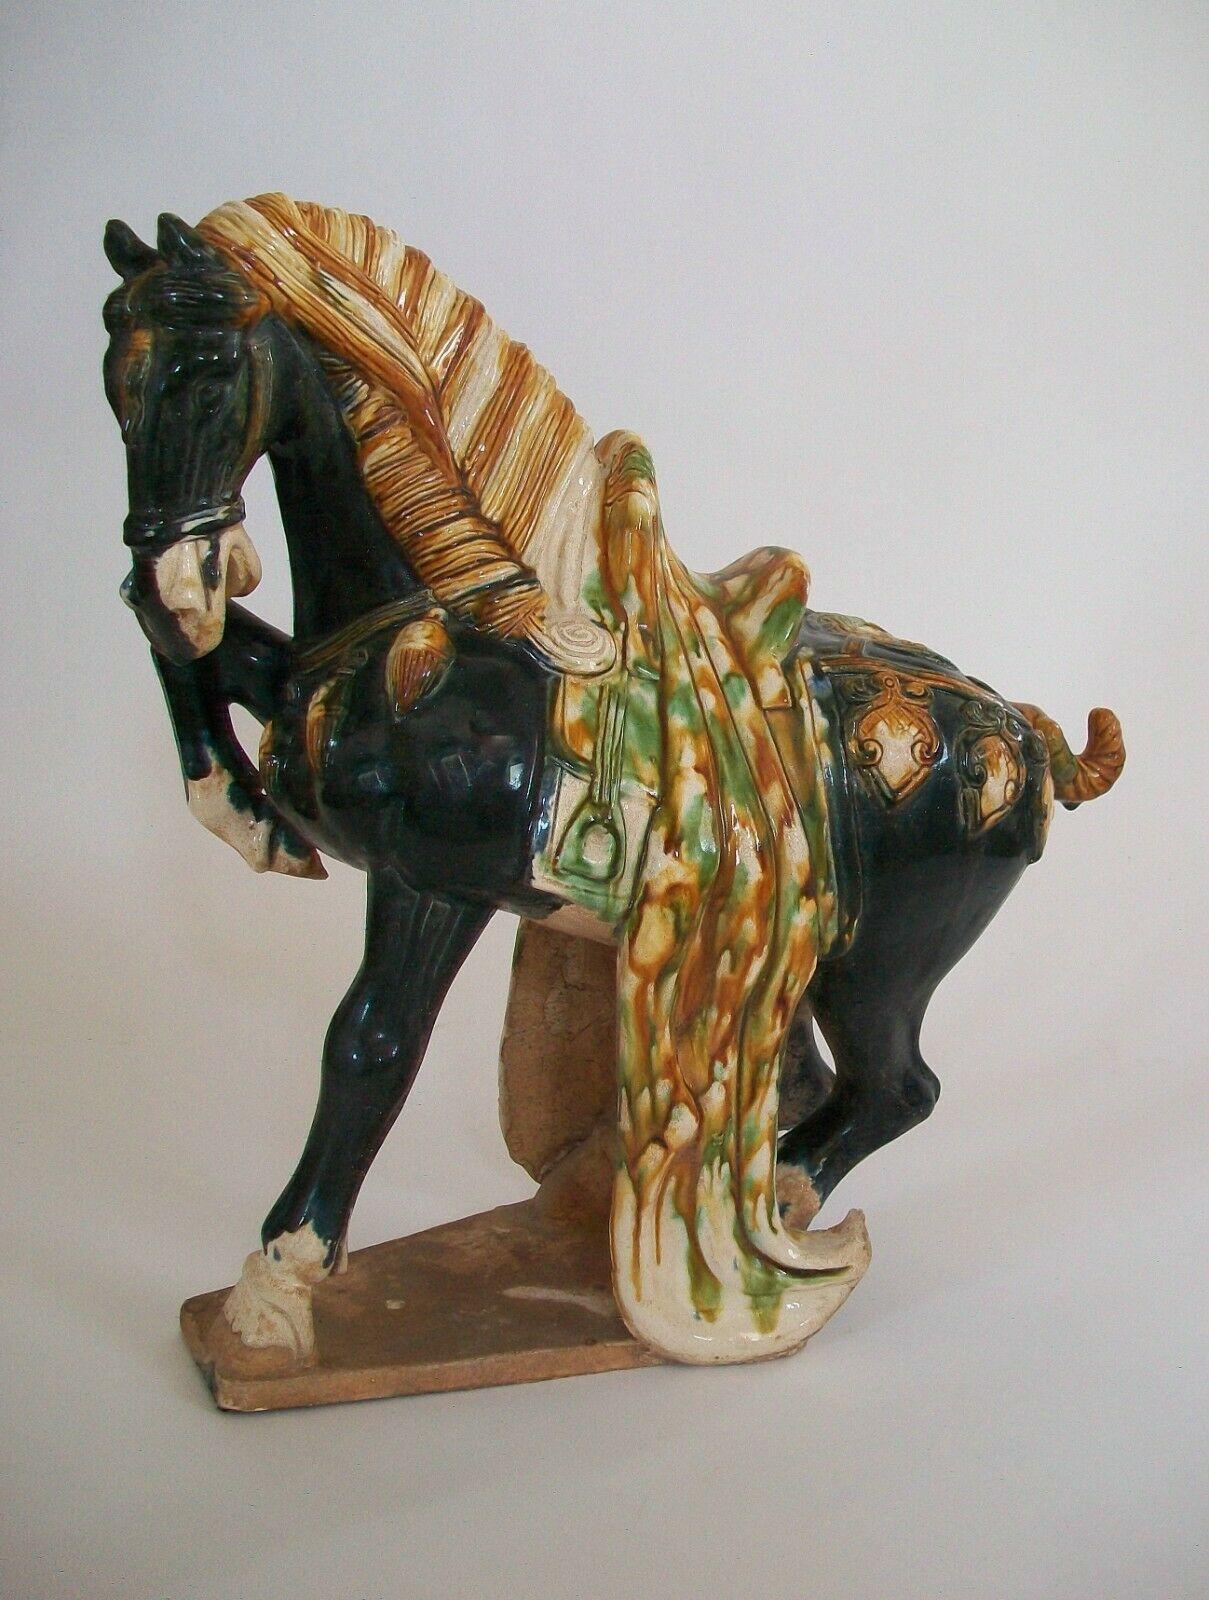 Large vintage sancai glazed Tang style ceramic horse - molded form - hand painted black glaze to the horse and ' egg and spinach ' glaze to the saddle and decorative elements - unsigned - China - mid / late 20th century.

Excellent vintage